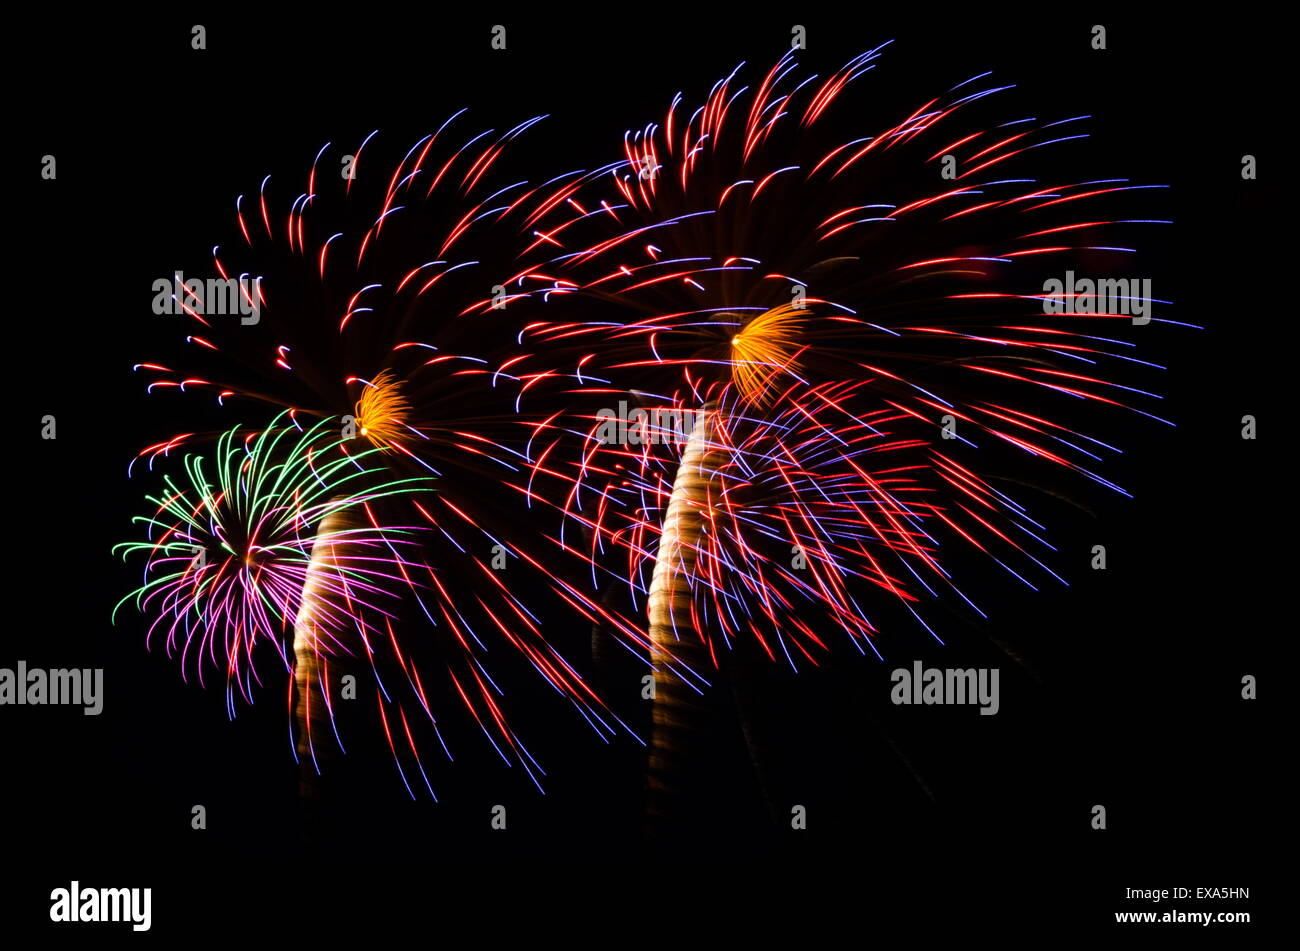 An image of exploding fireworks at night. Represents a celebration. Stock Photo